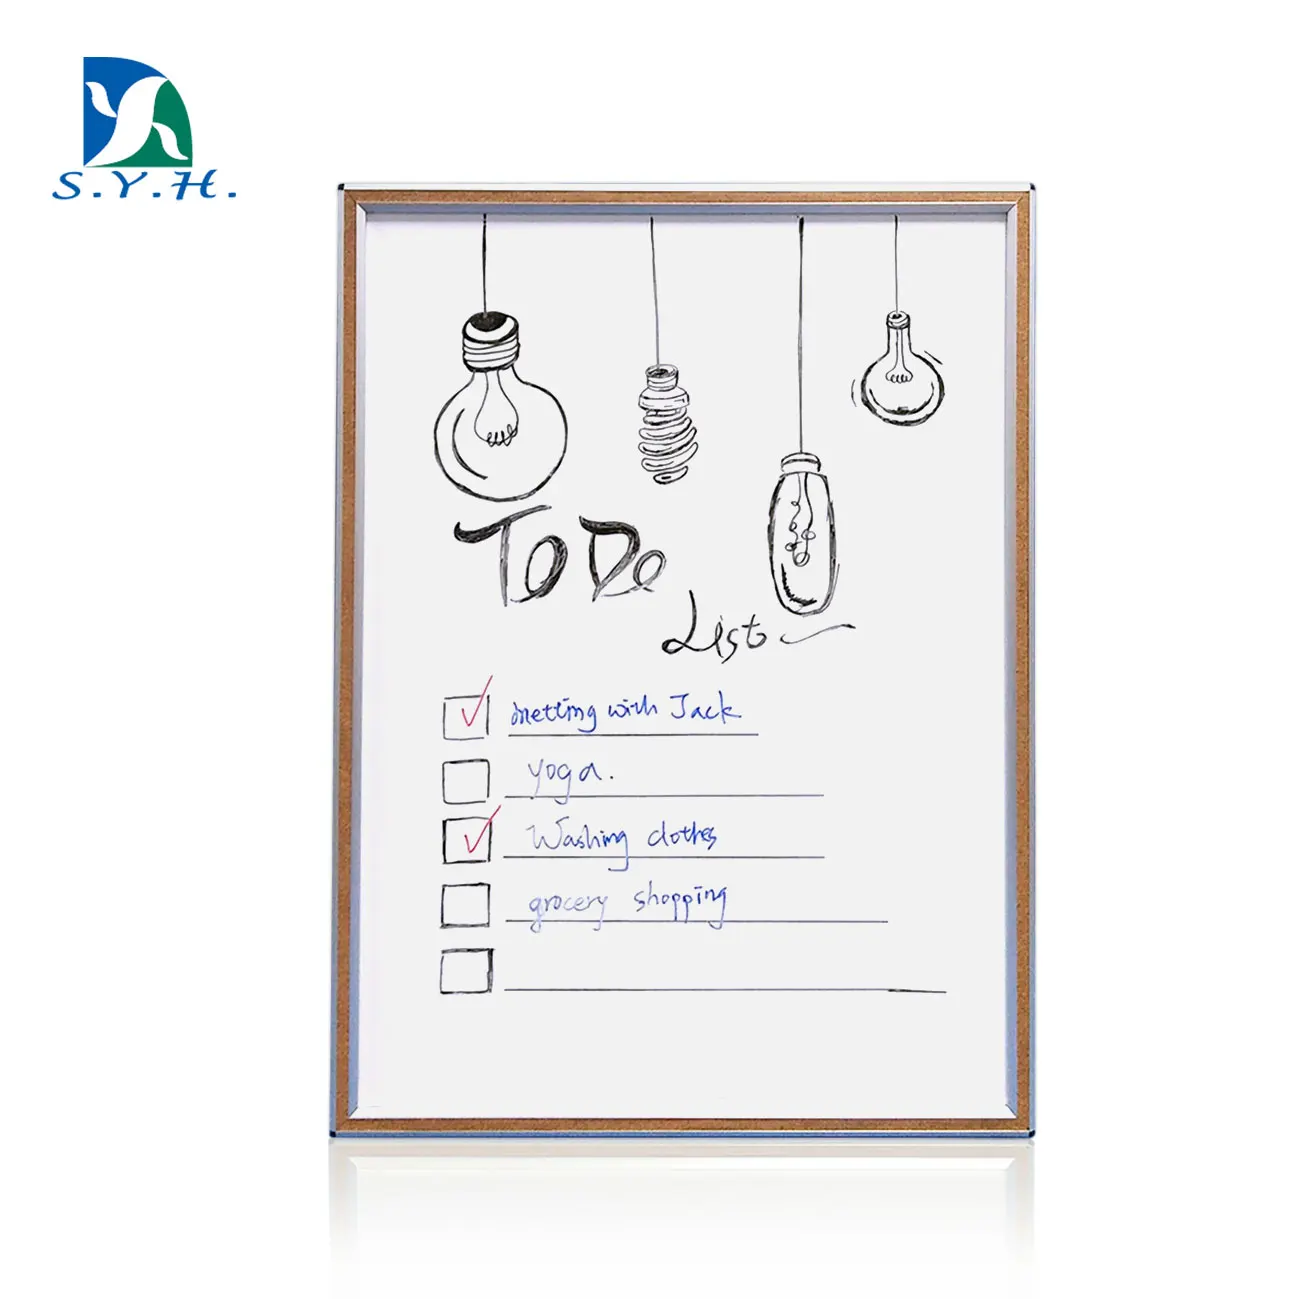 
2 In 1 Aluminum frame magnetic notice whiteboard with cork board  (62015749005)